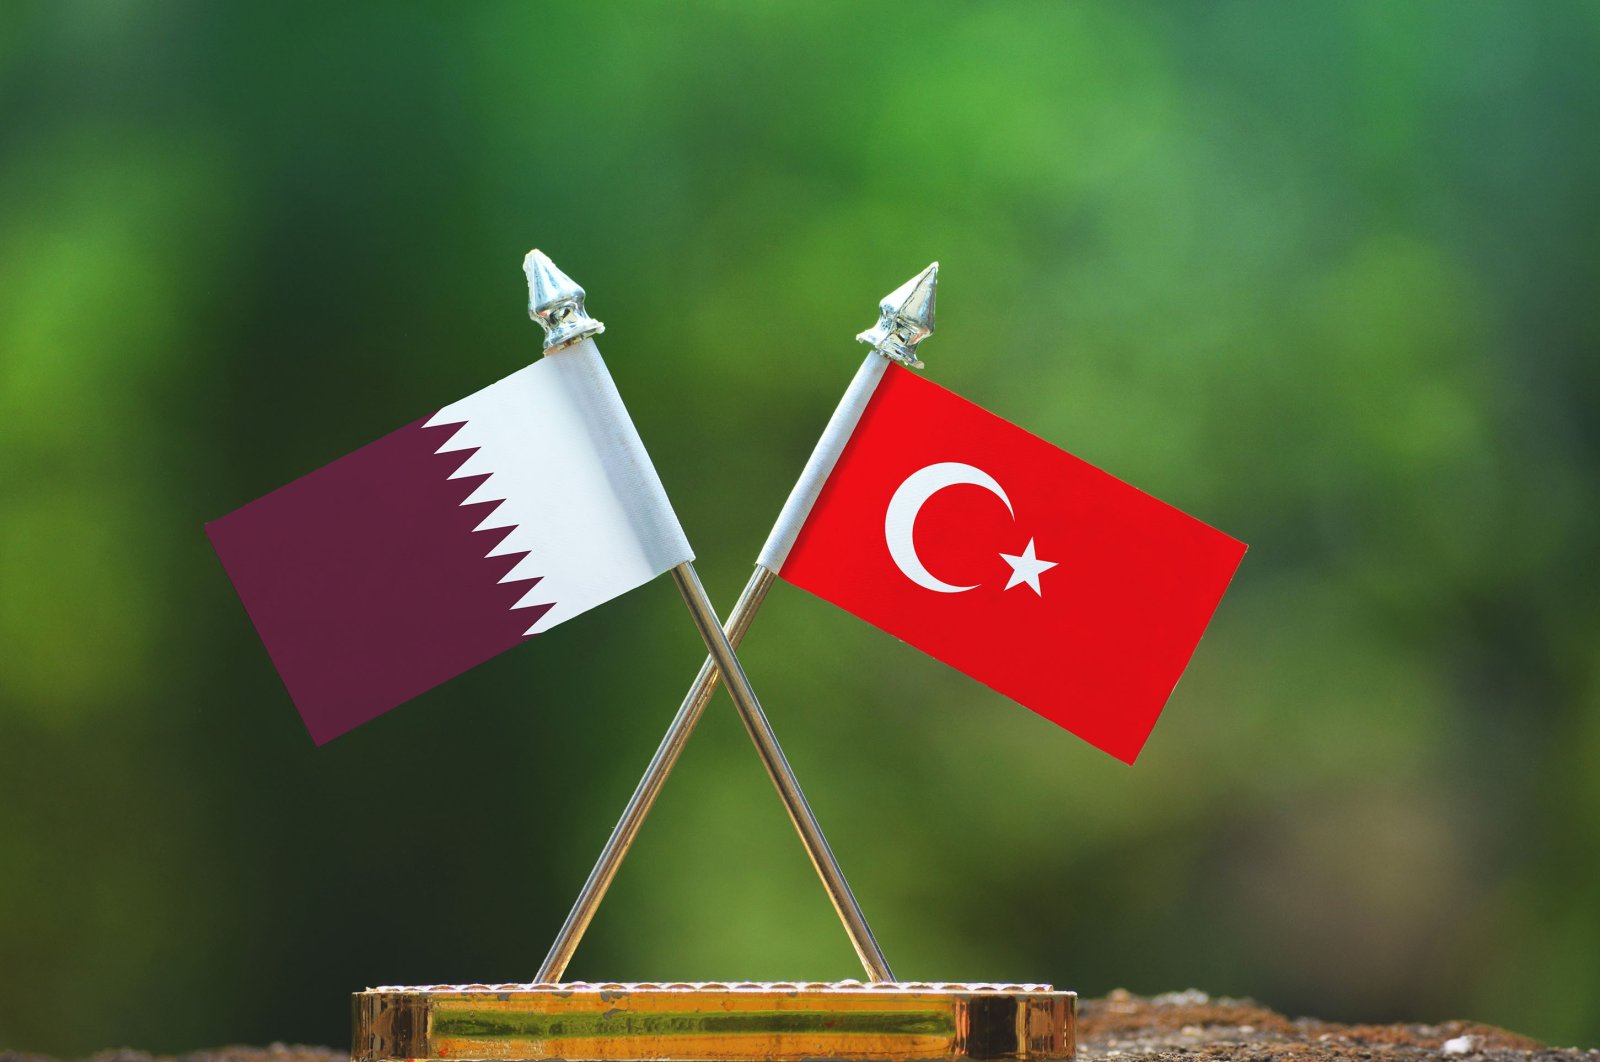 The flags of Qatar and Turkey. (Photo by Shutterstock)